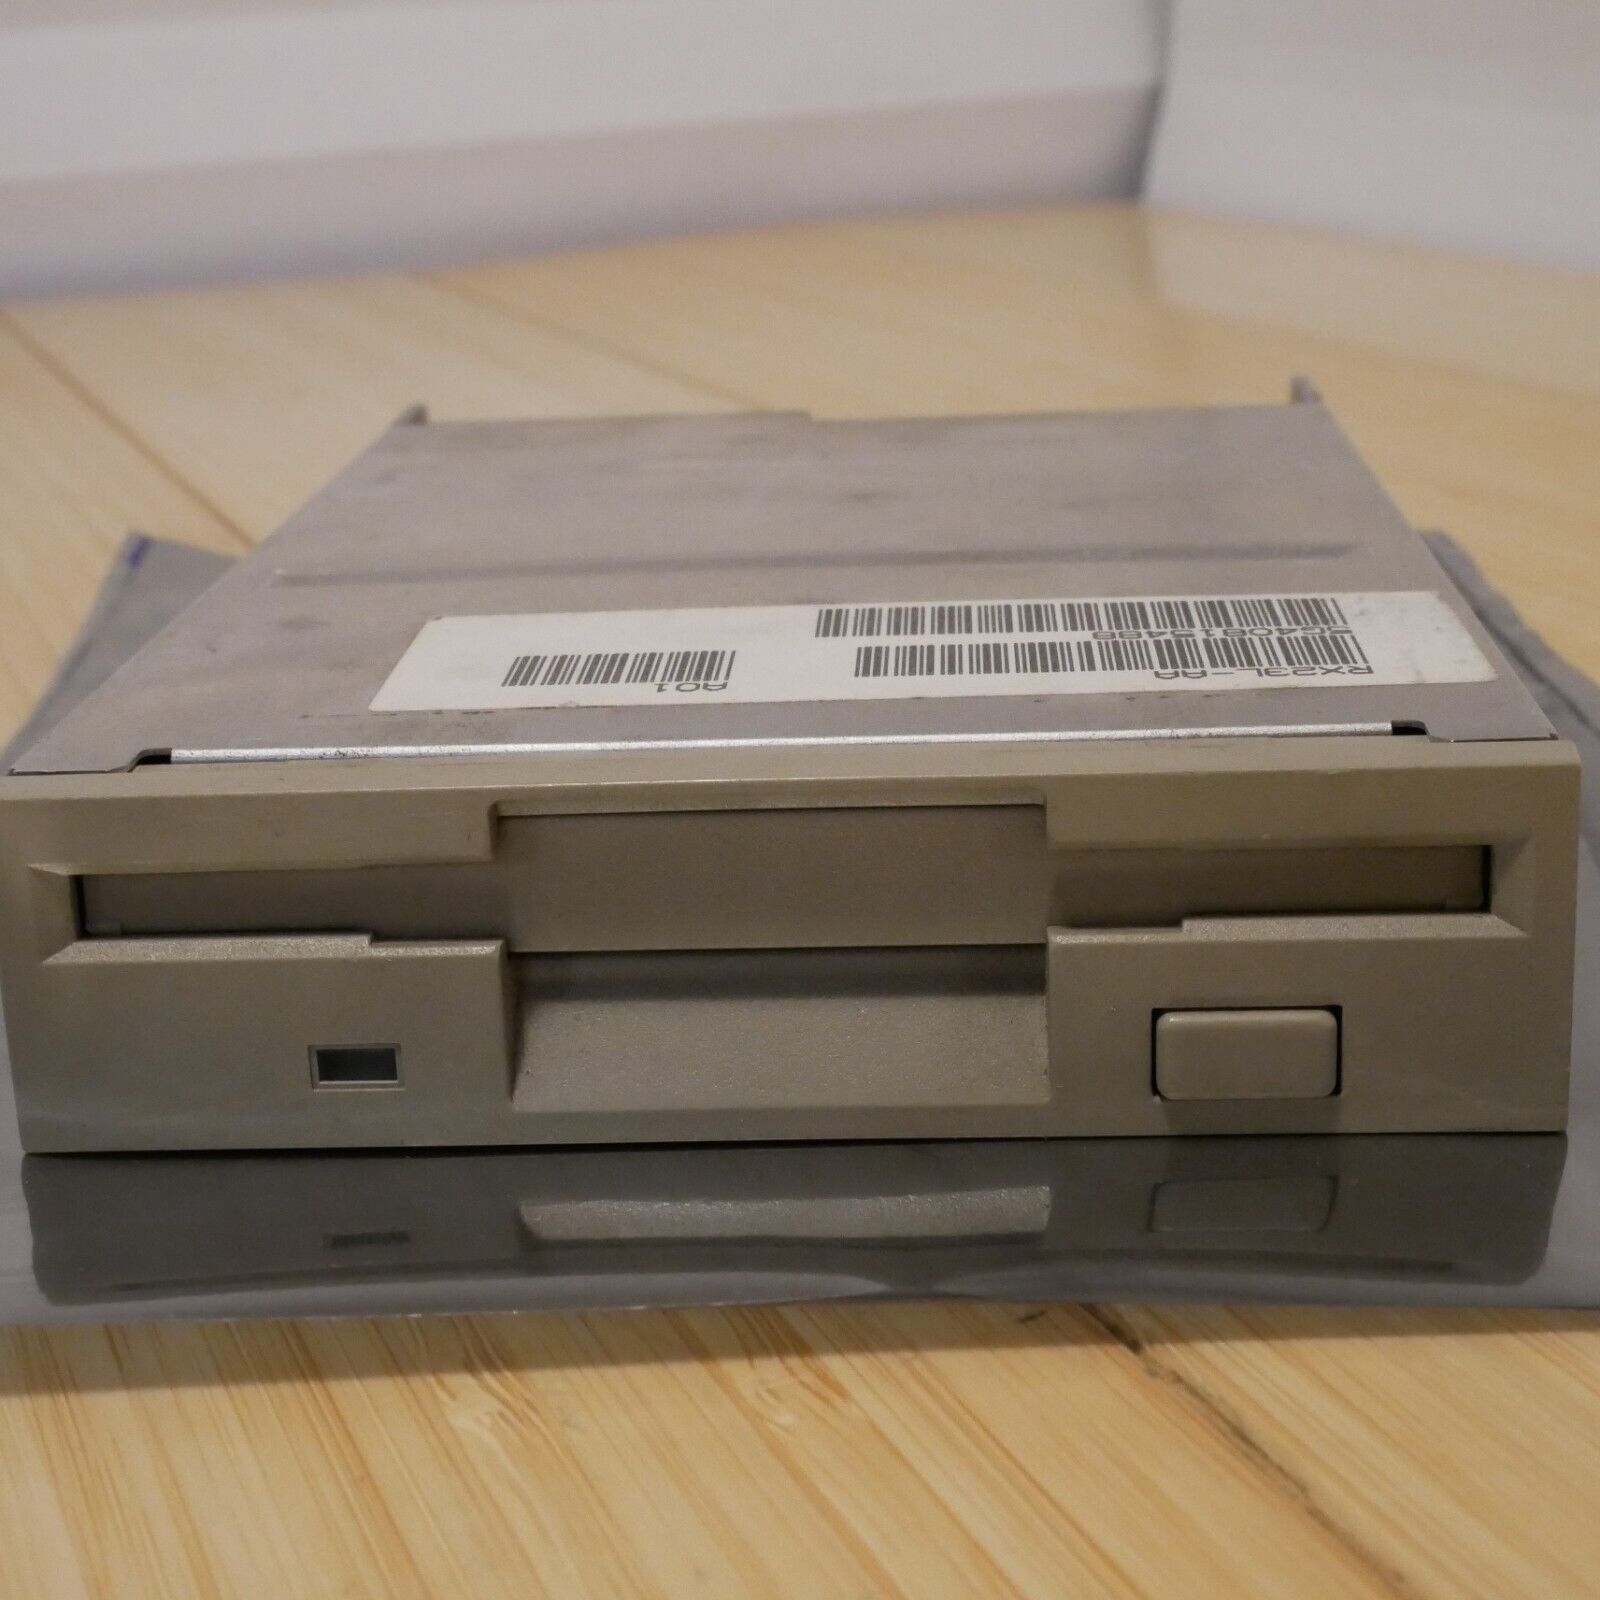 TEAC 3.5 inch Internal Floppy Disk Drive Model FD-235HF Tested & Working - 26 - £40.74 GBP